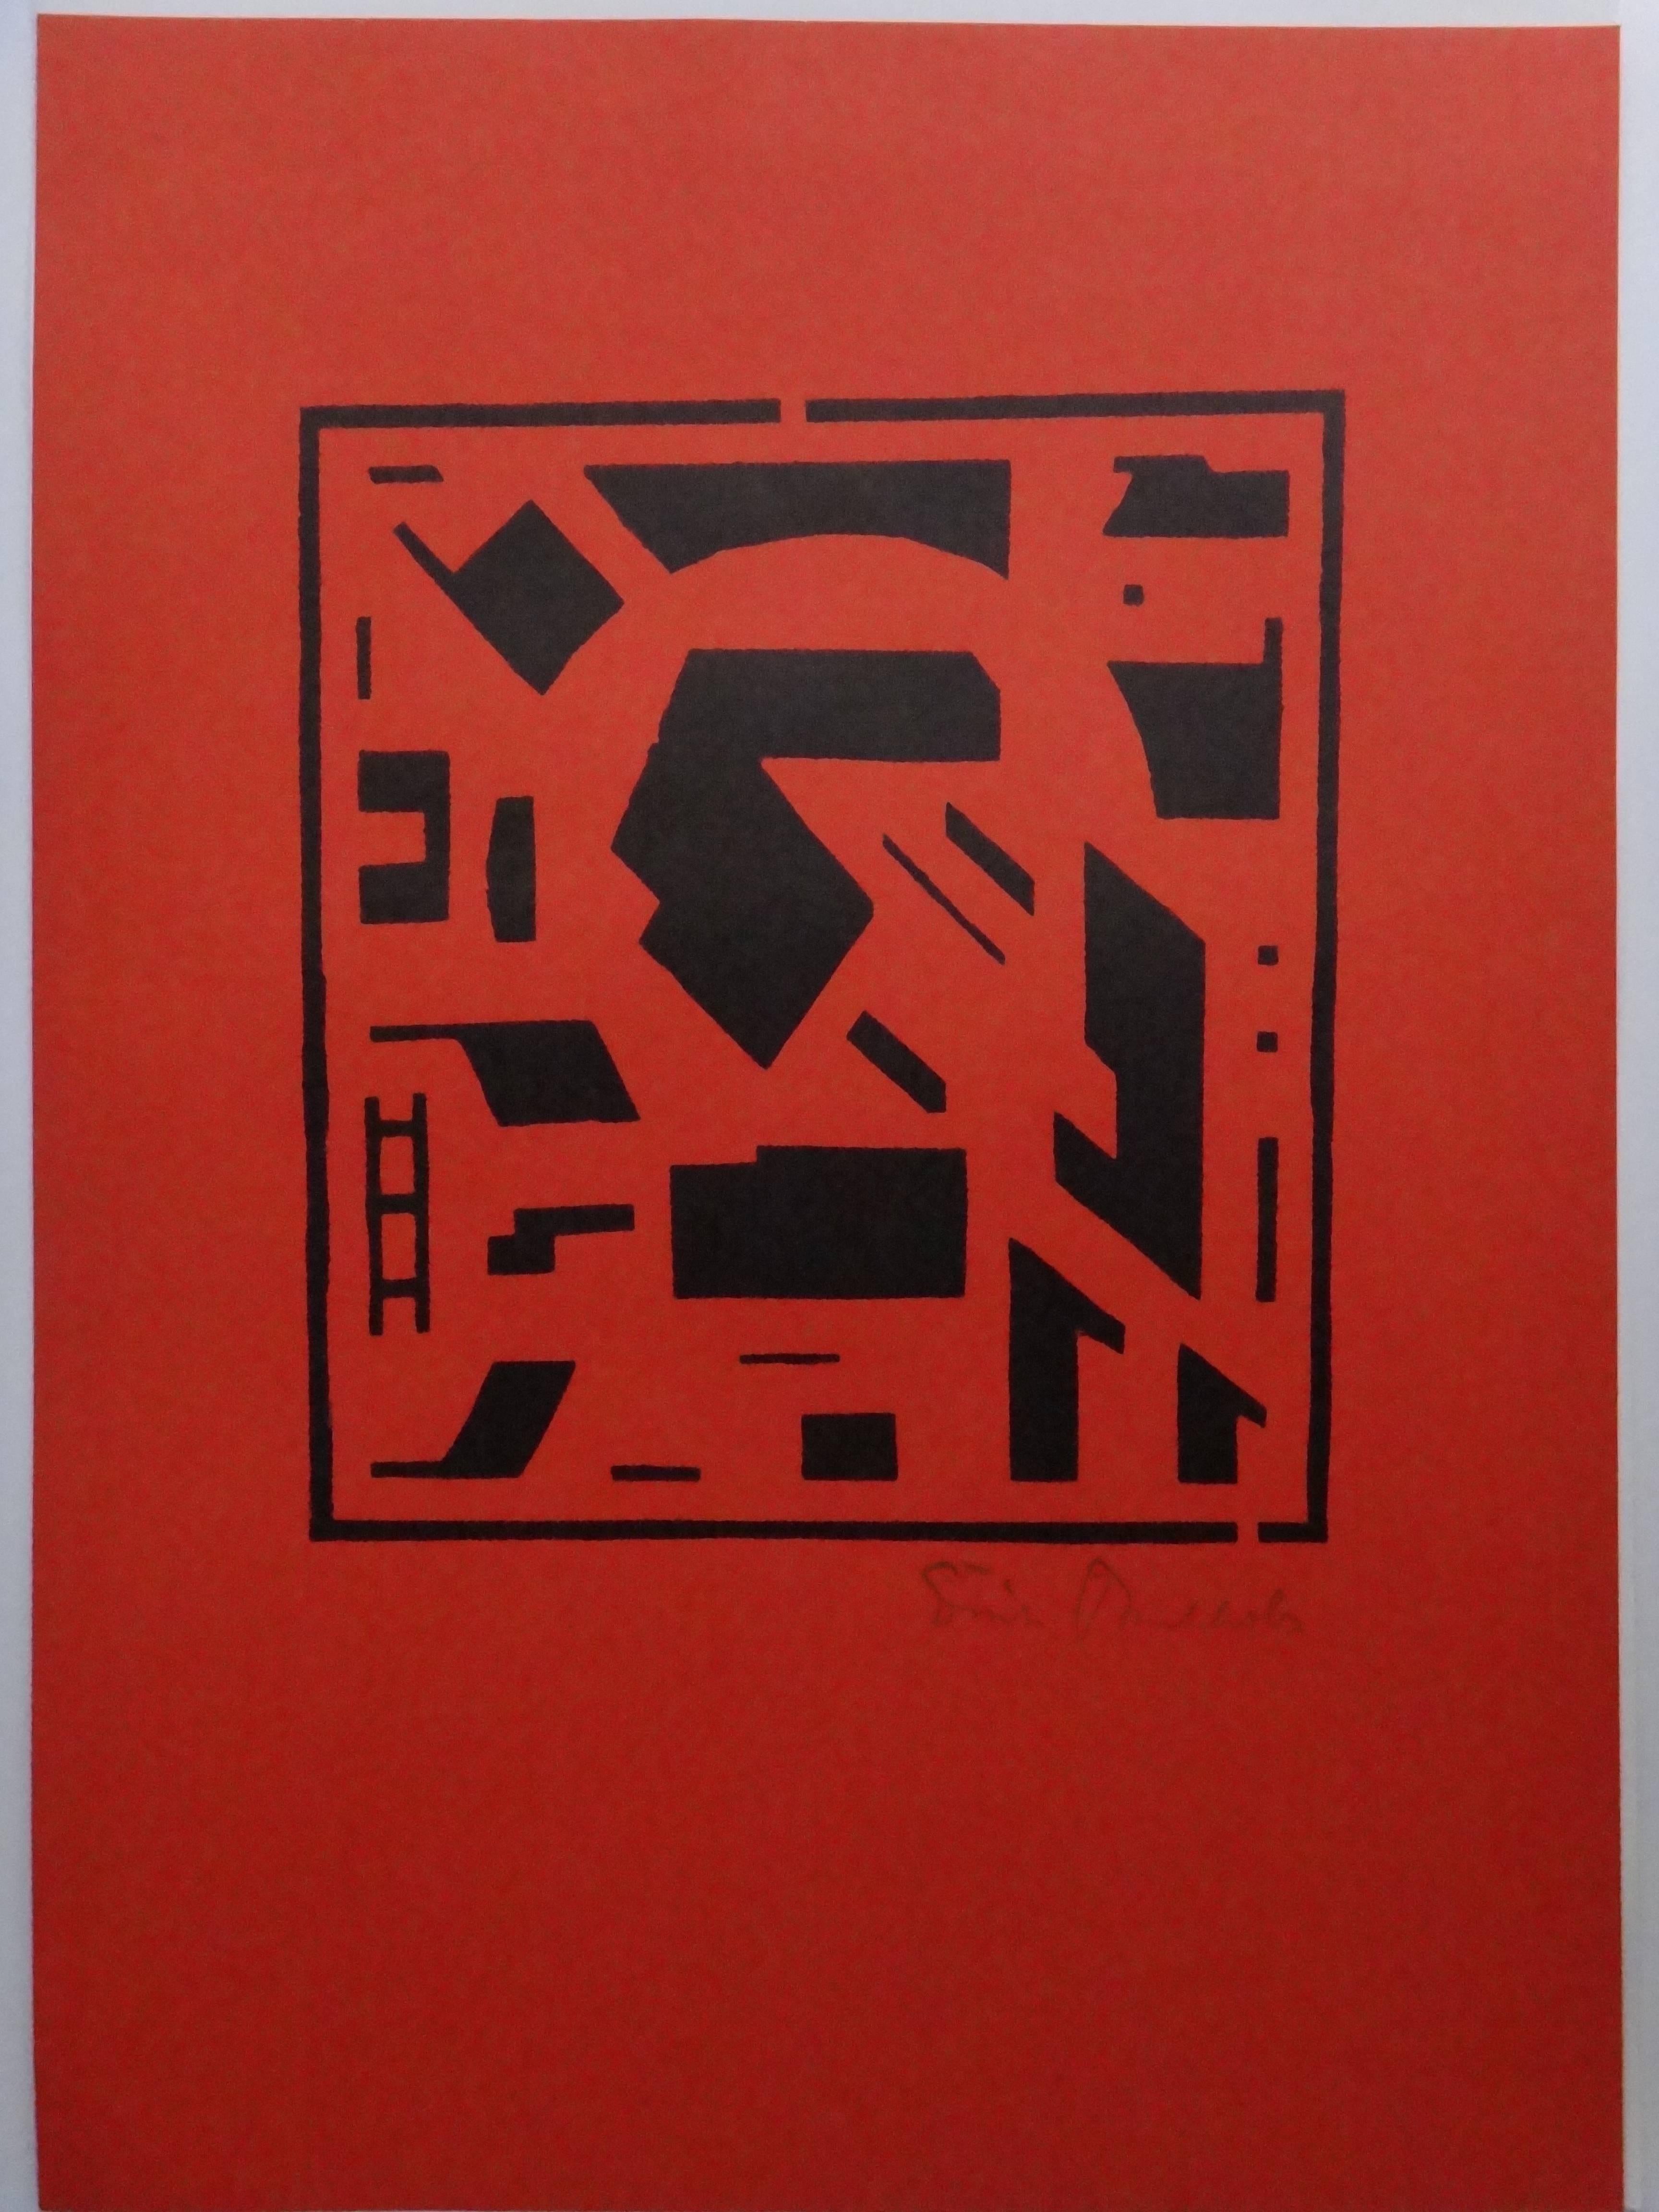 "Composition" by Erich Buchholz, Woodcut